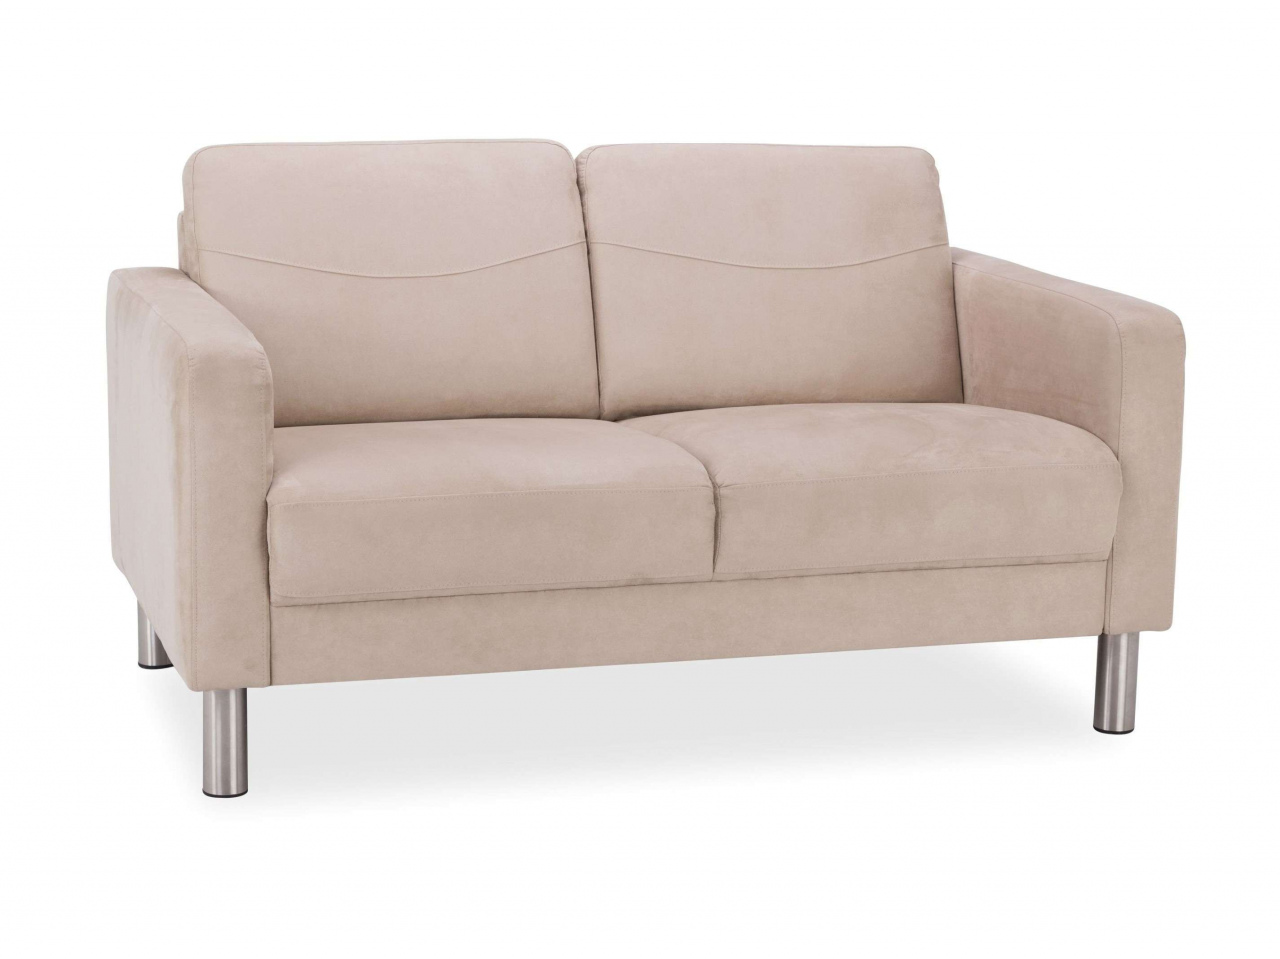 sofa with bed liege lounge garten luxus couch liege luxus lounge sofa garten schon durch sofa with bed